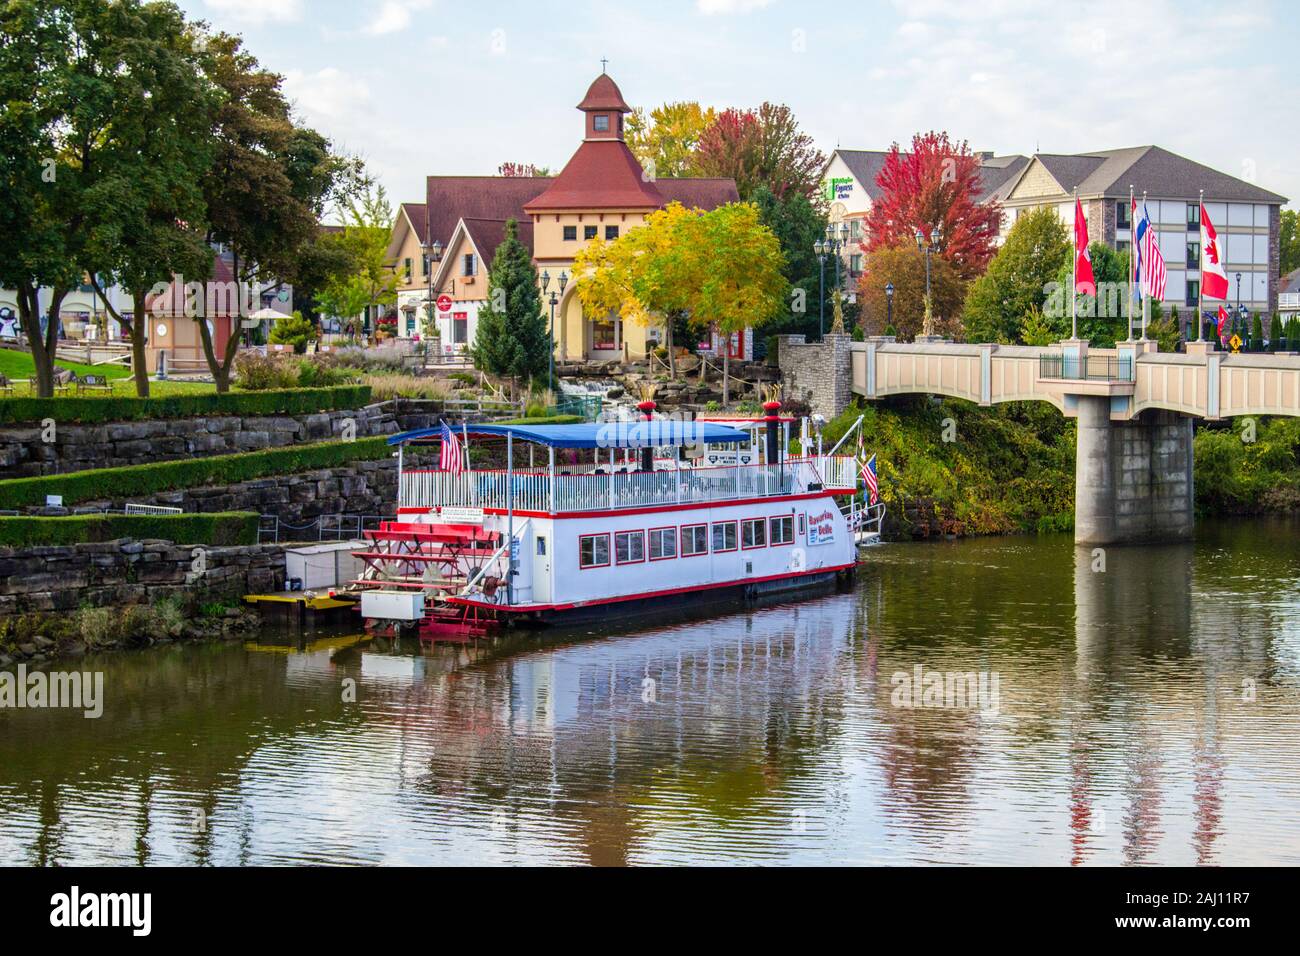 Frankenmuth, Michigan, USA - Frankenmuth cityscape with the Bavarian Belle Riverboat. Frankenmuth is the second most popular tourist town in Michigan. Stock Photo